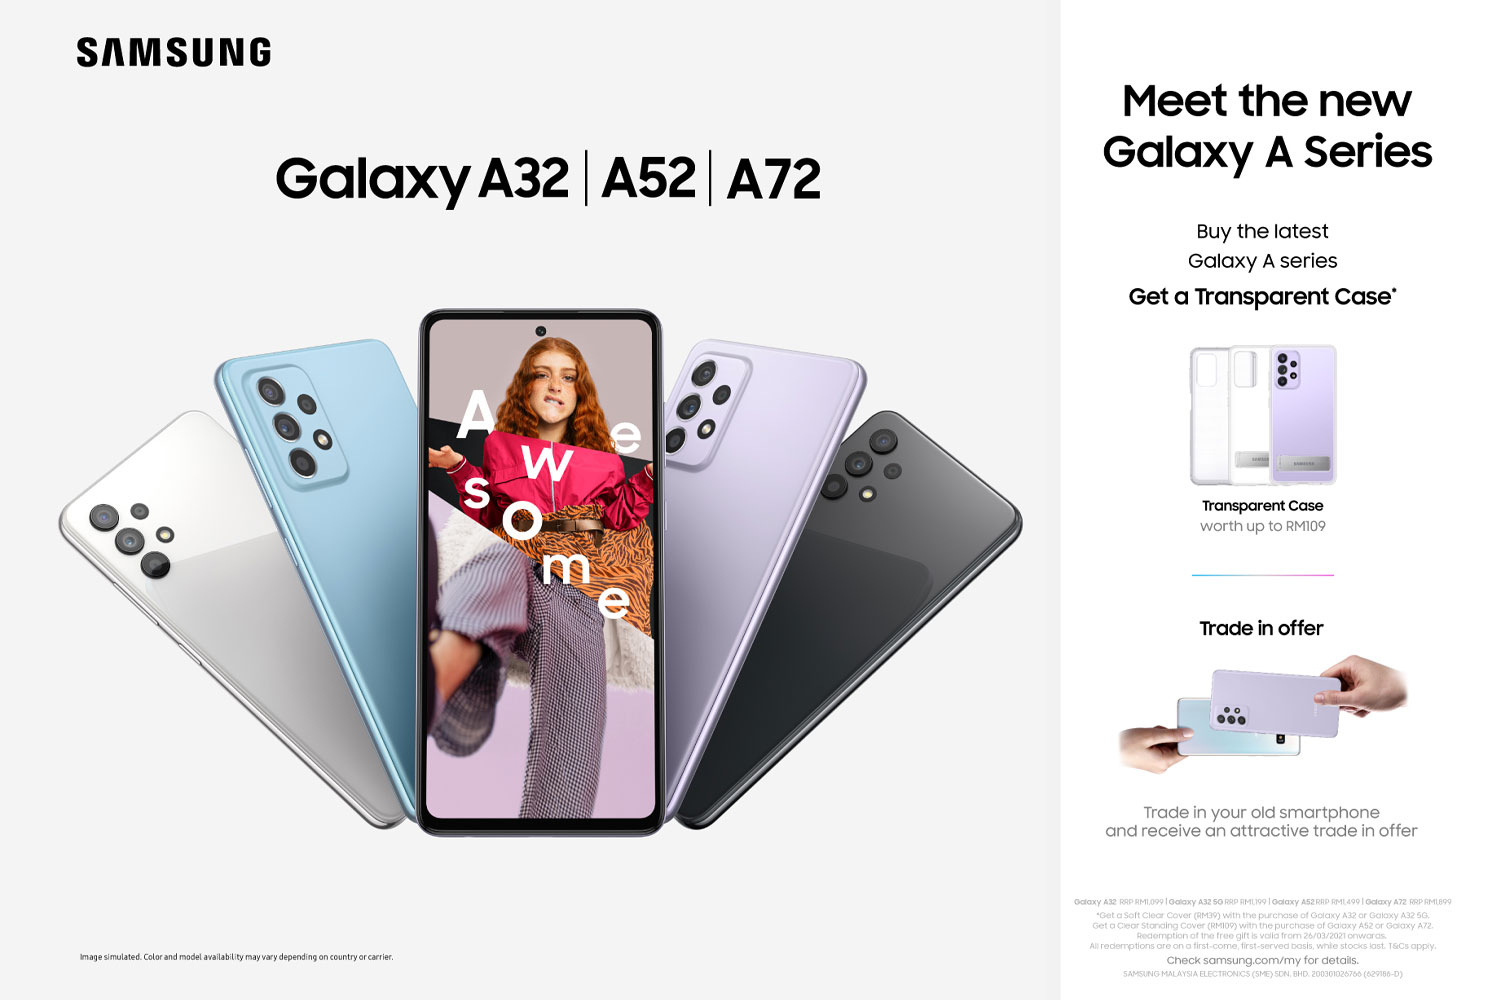 Samsung Galaxy A32, A52, and A72 Coming on March 26